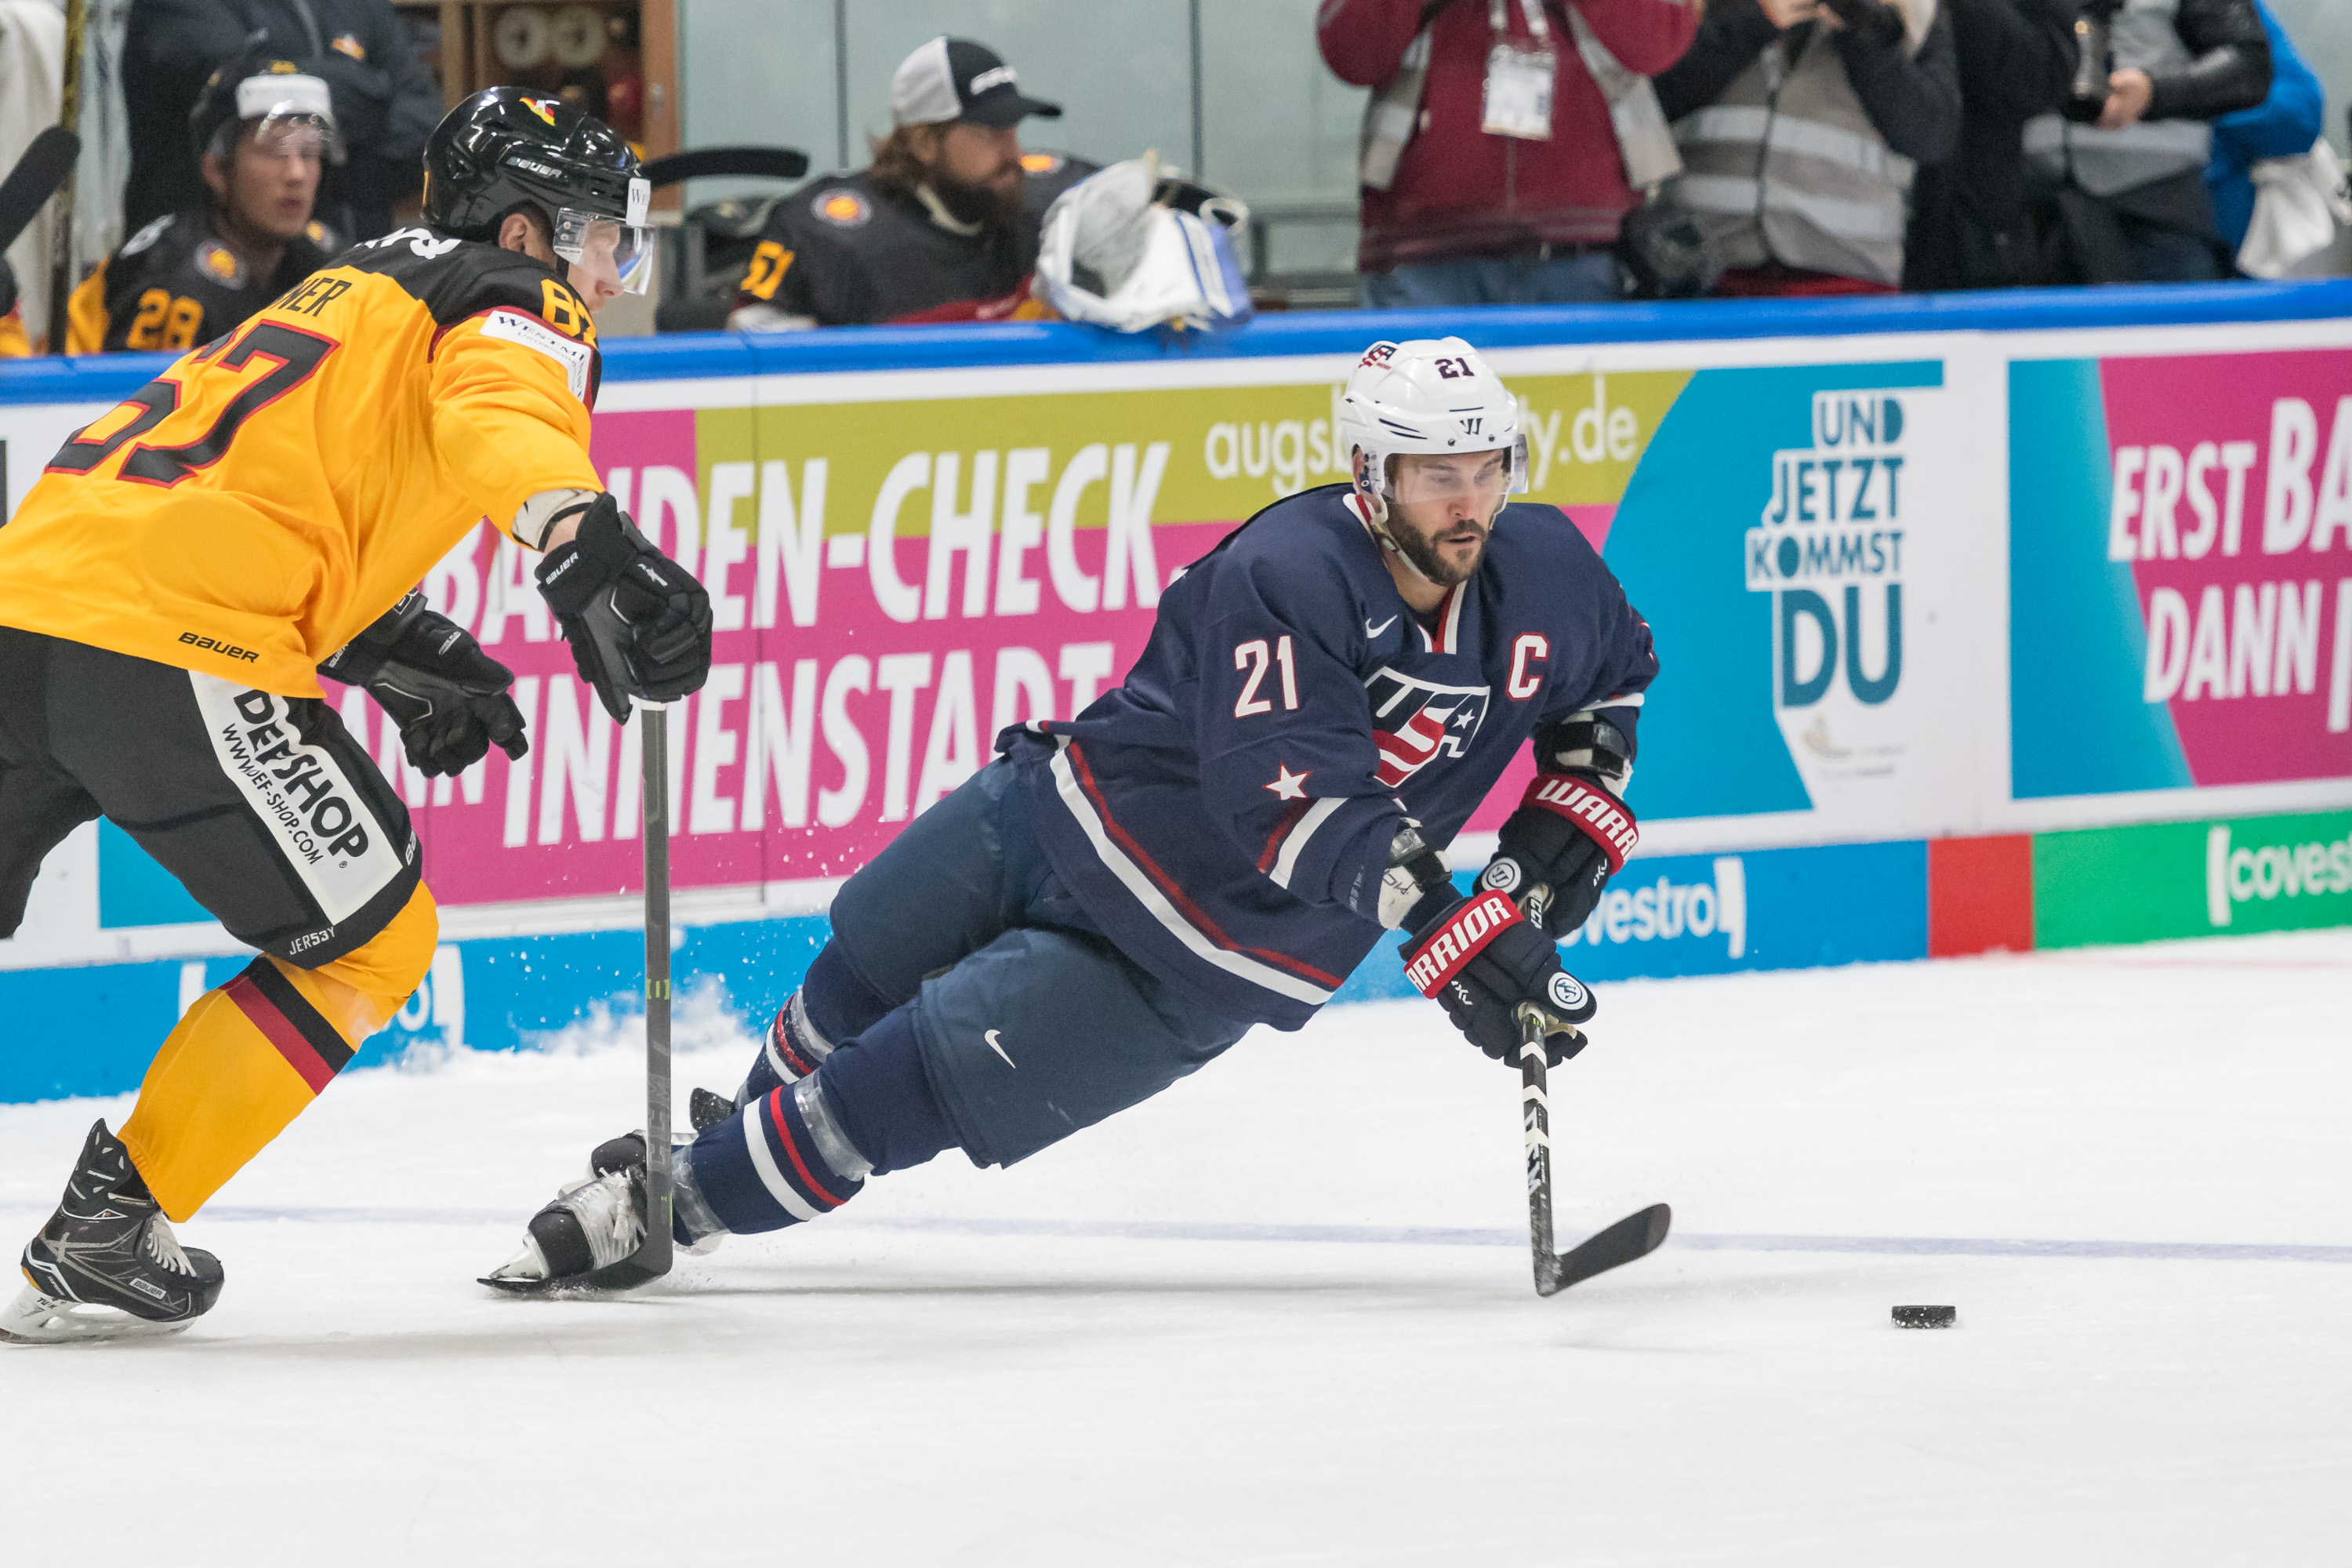 Team Usa Ice Hockey Roster Released For 18 Winter Olympics Time